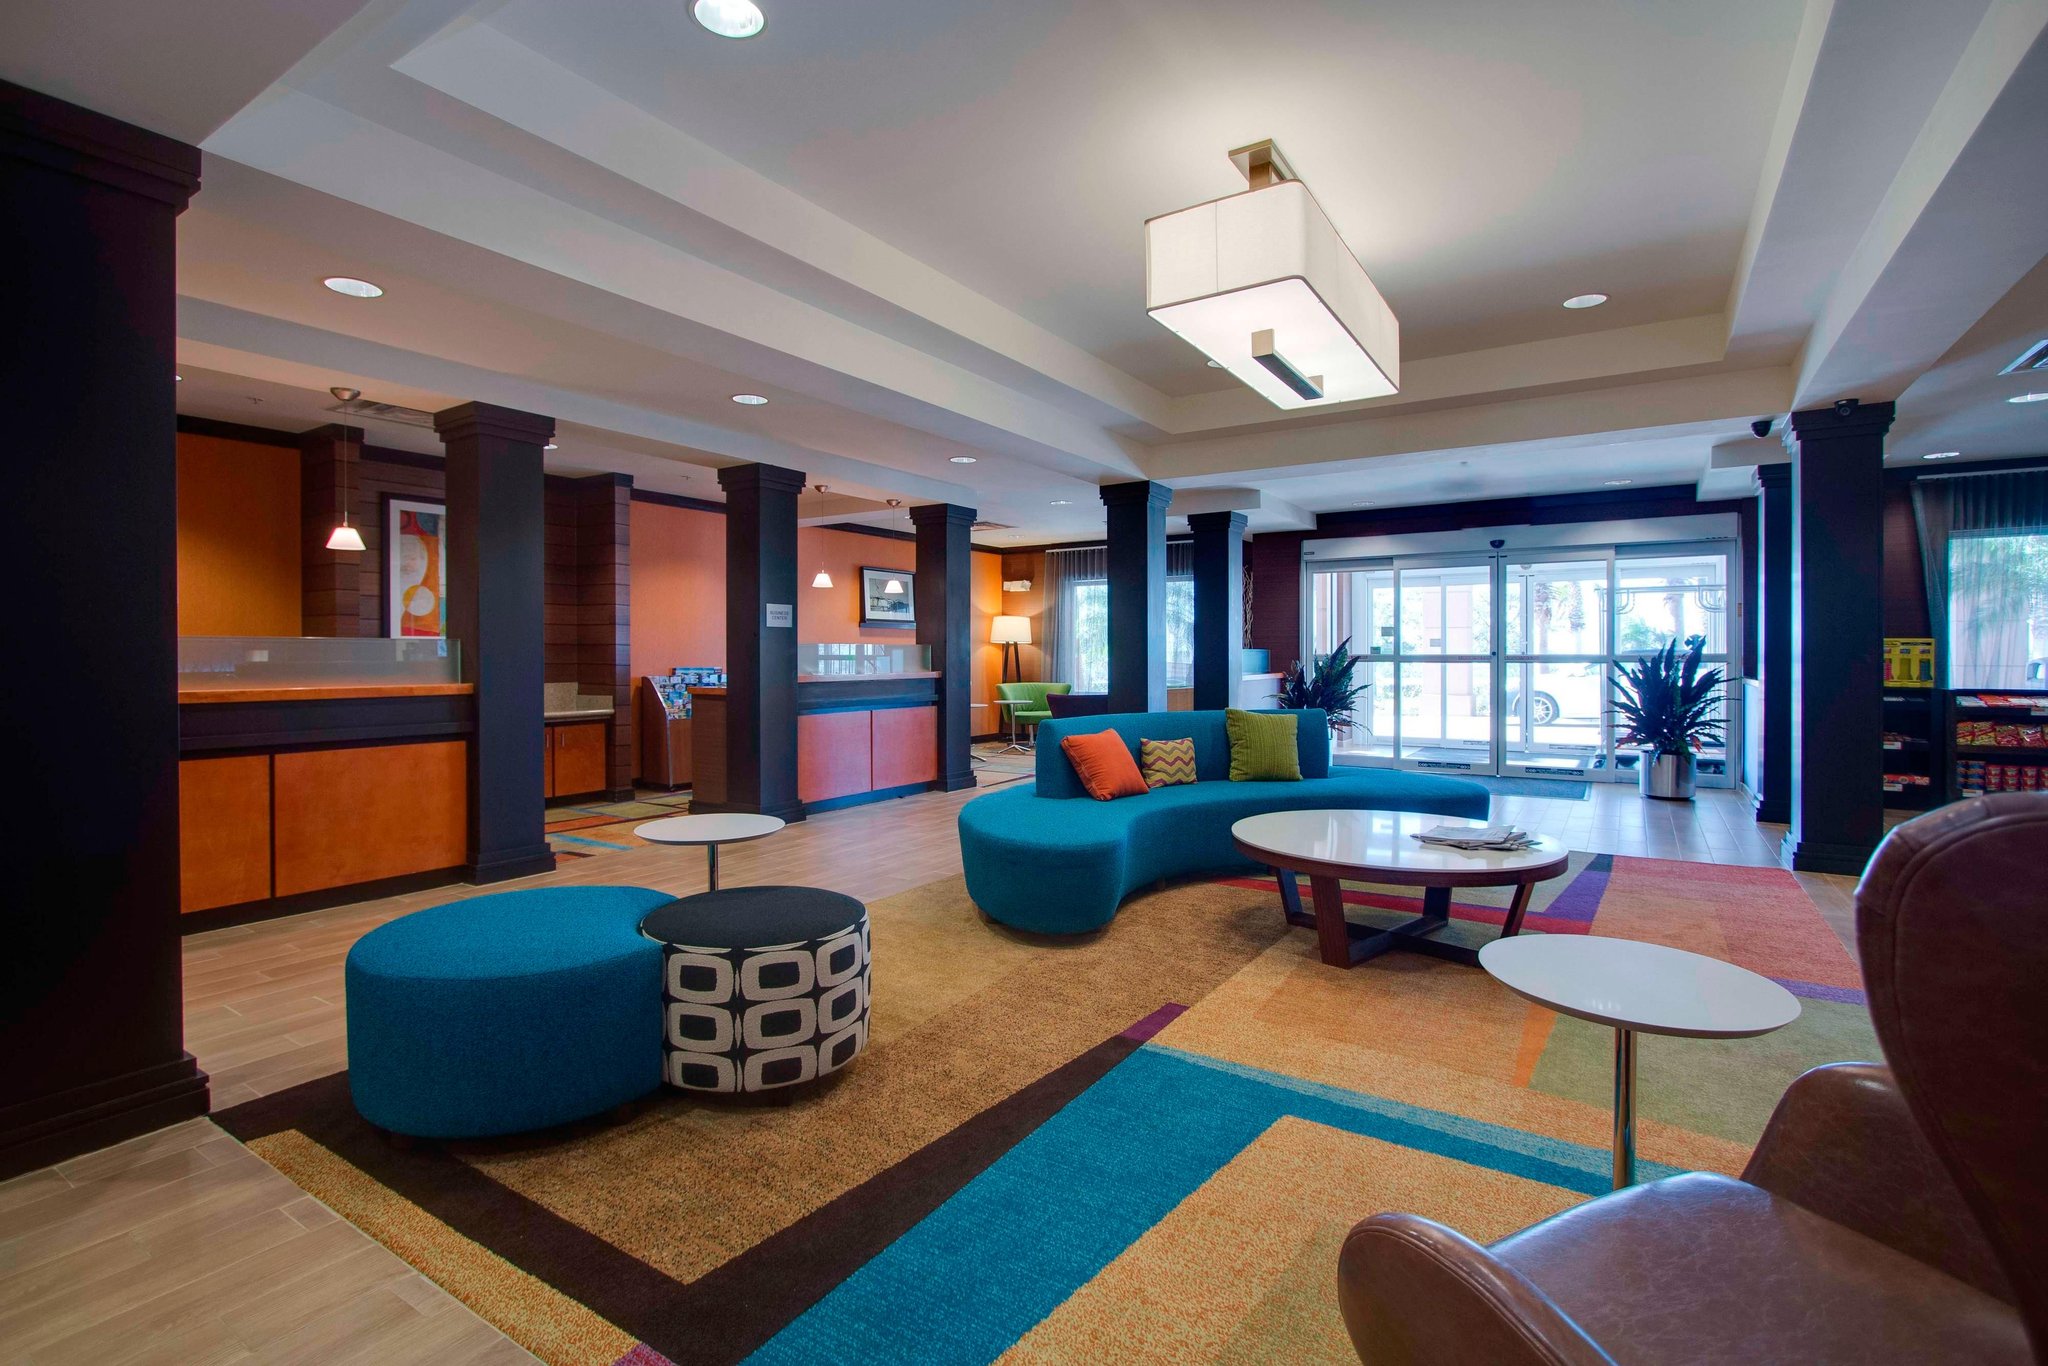 Fairfield Inn And Suites Clermont